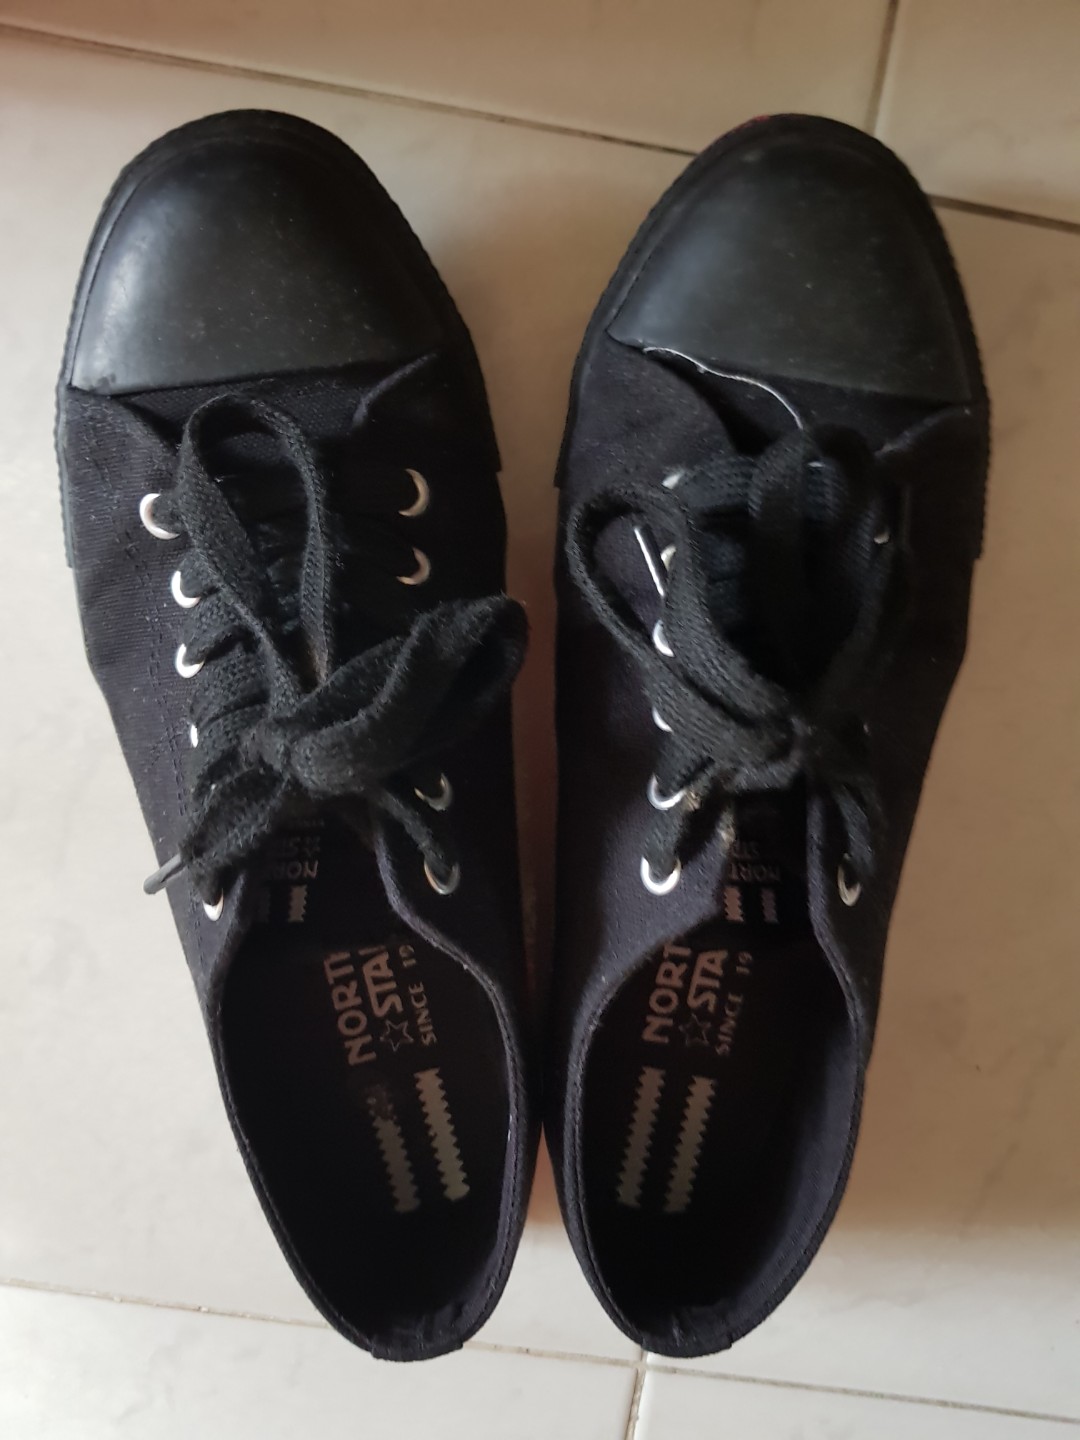 north star shoes black